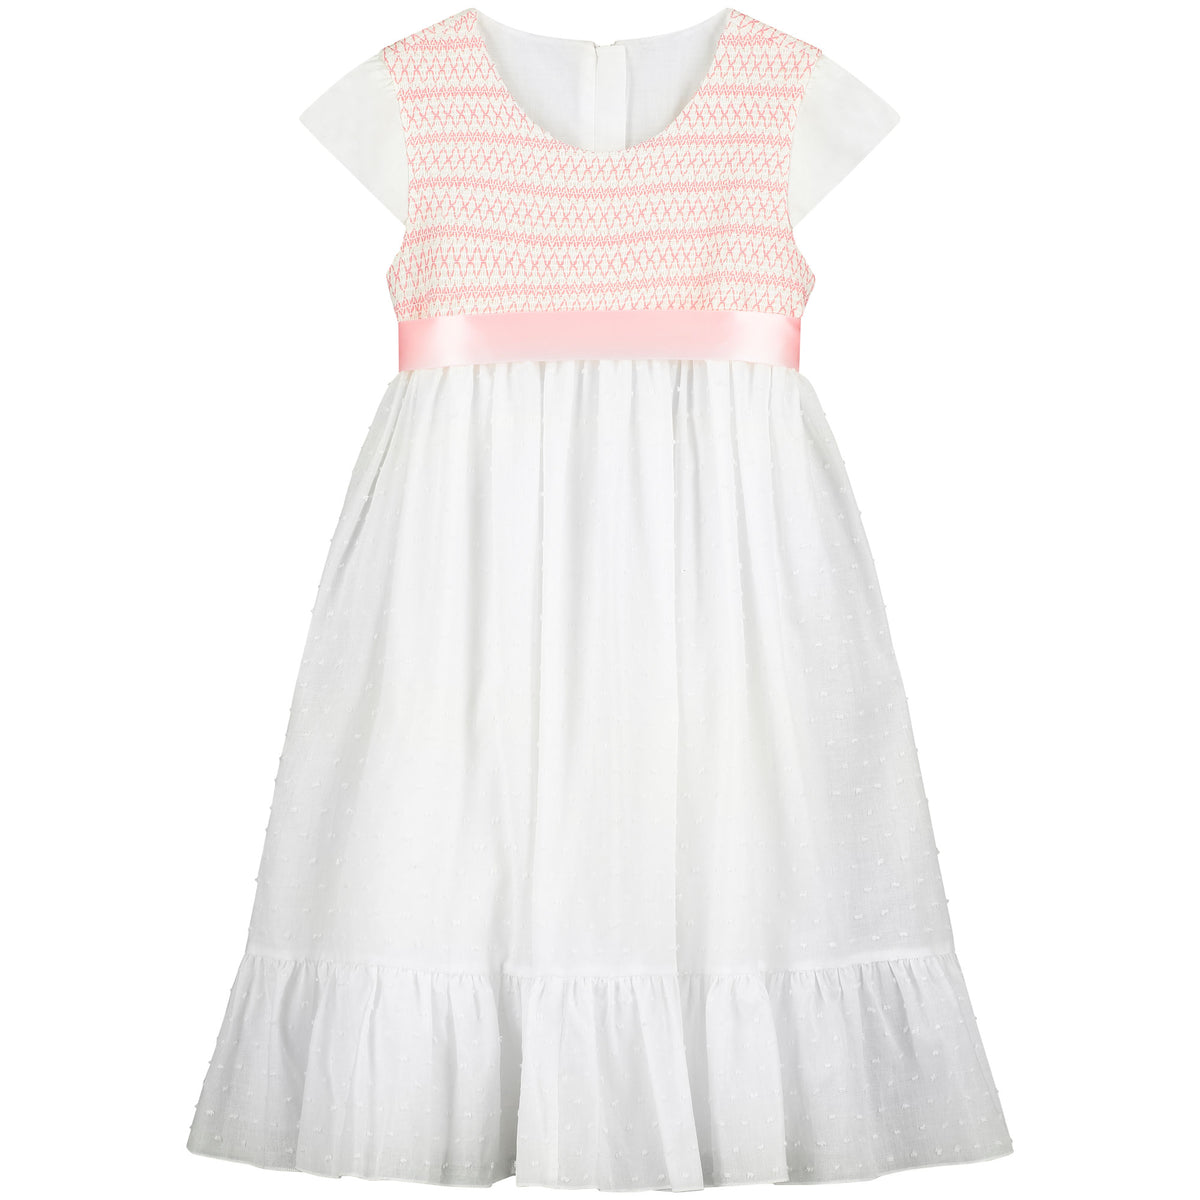 Smocked Cotton Girls Occasion Dress White | Holly Hastie London